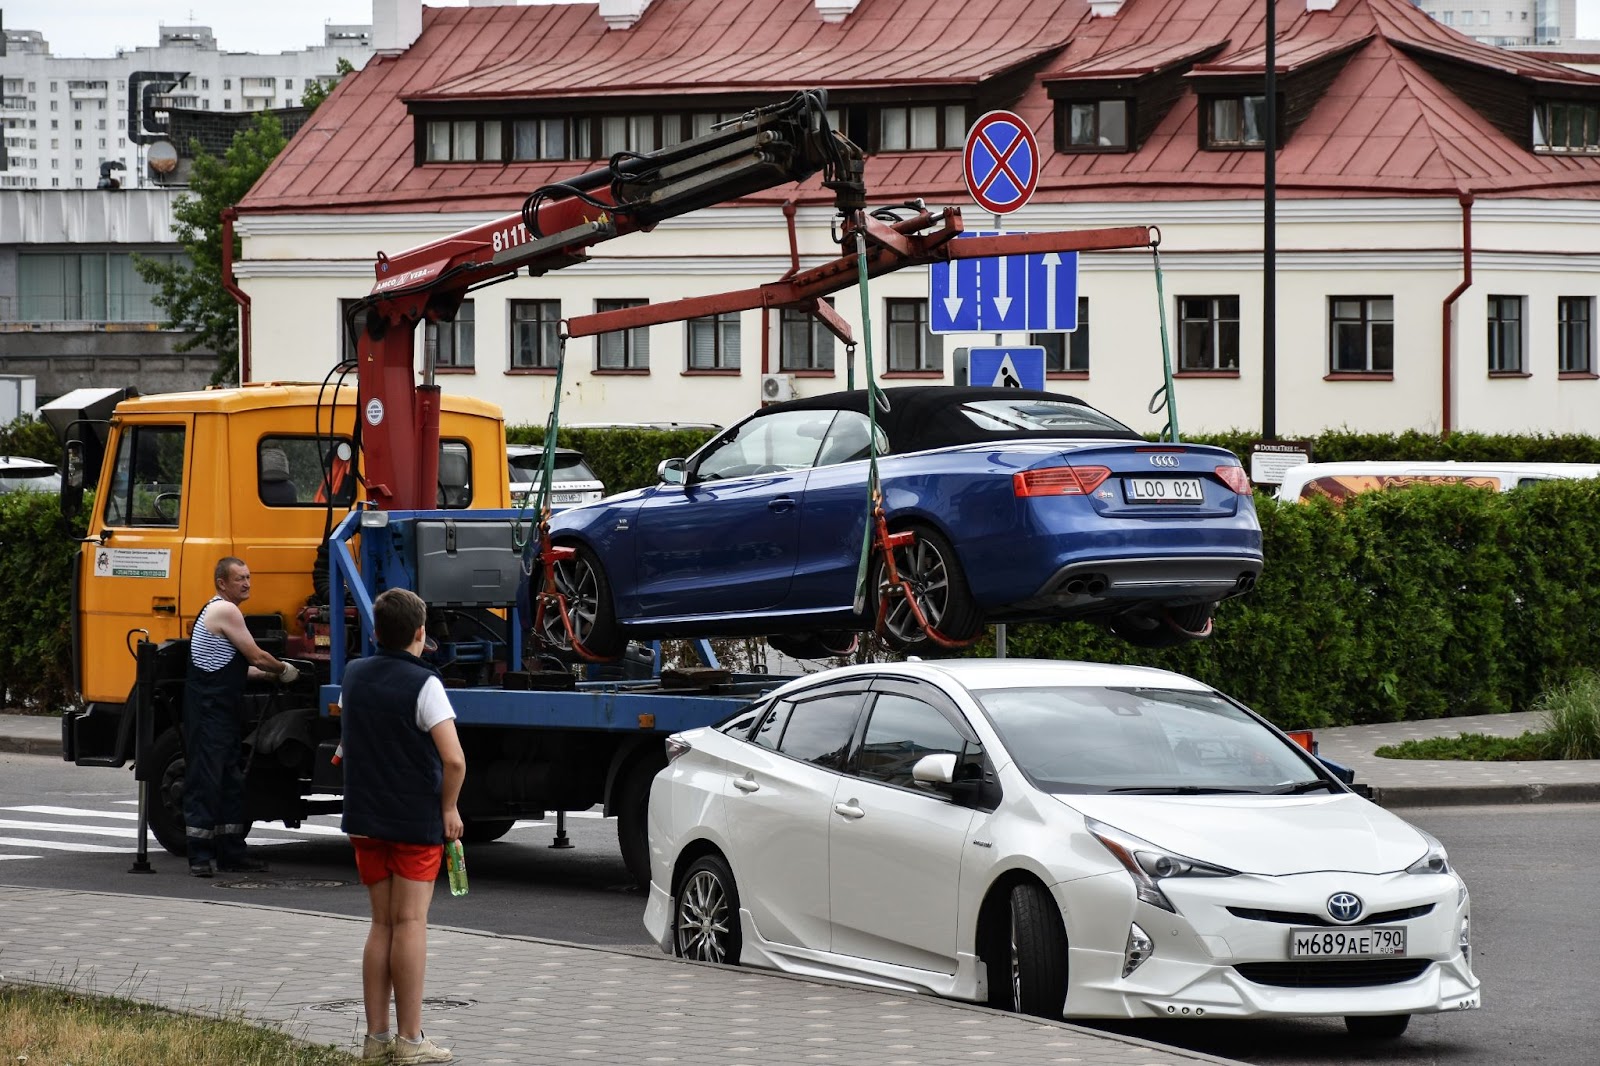 A car being towed away.